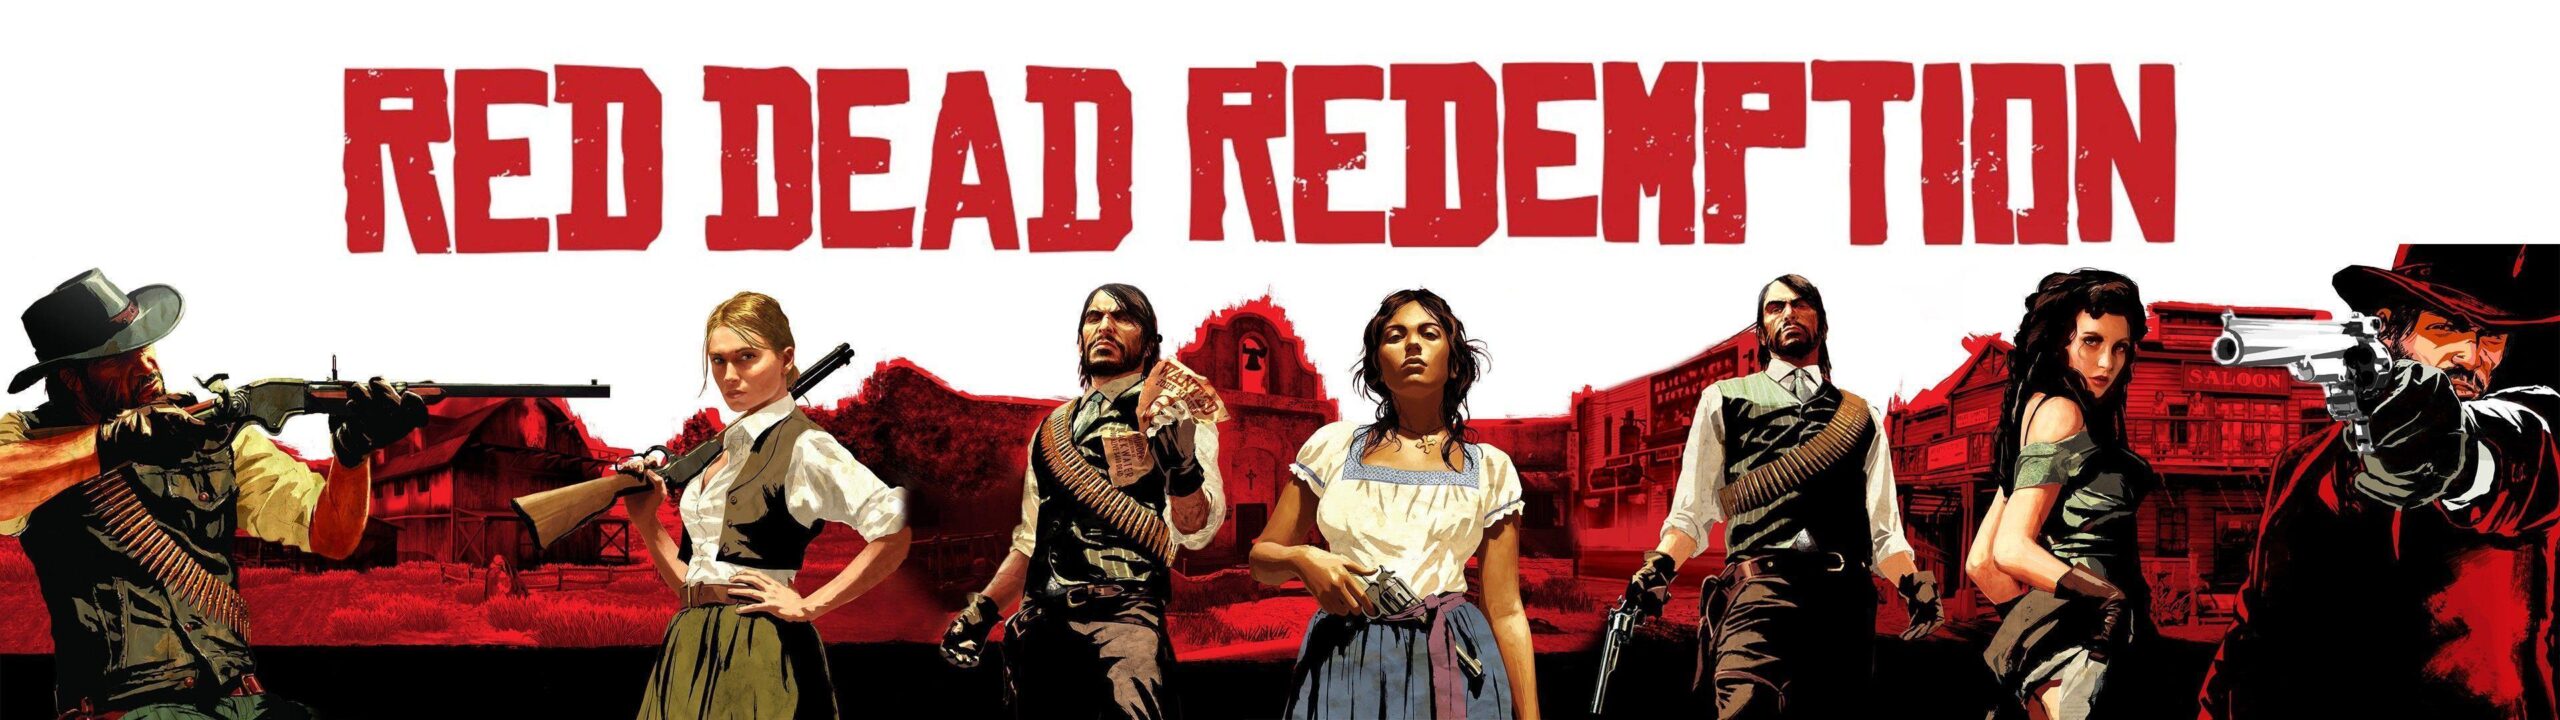 Red Dead Redemption Free 4K Wallpapers